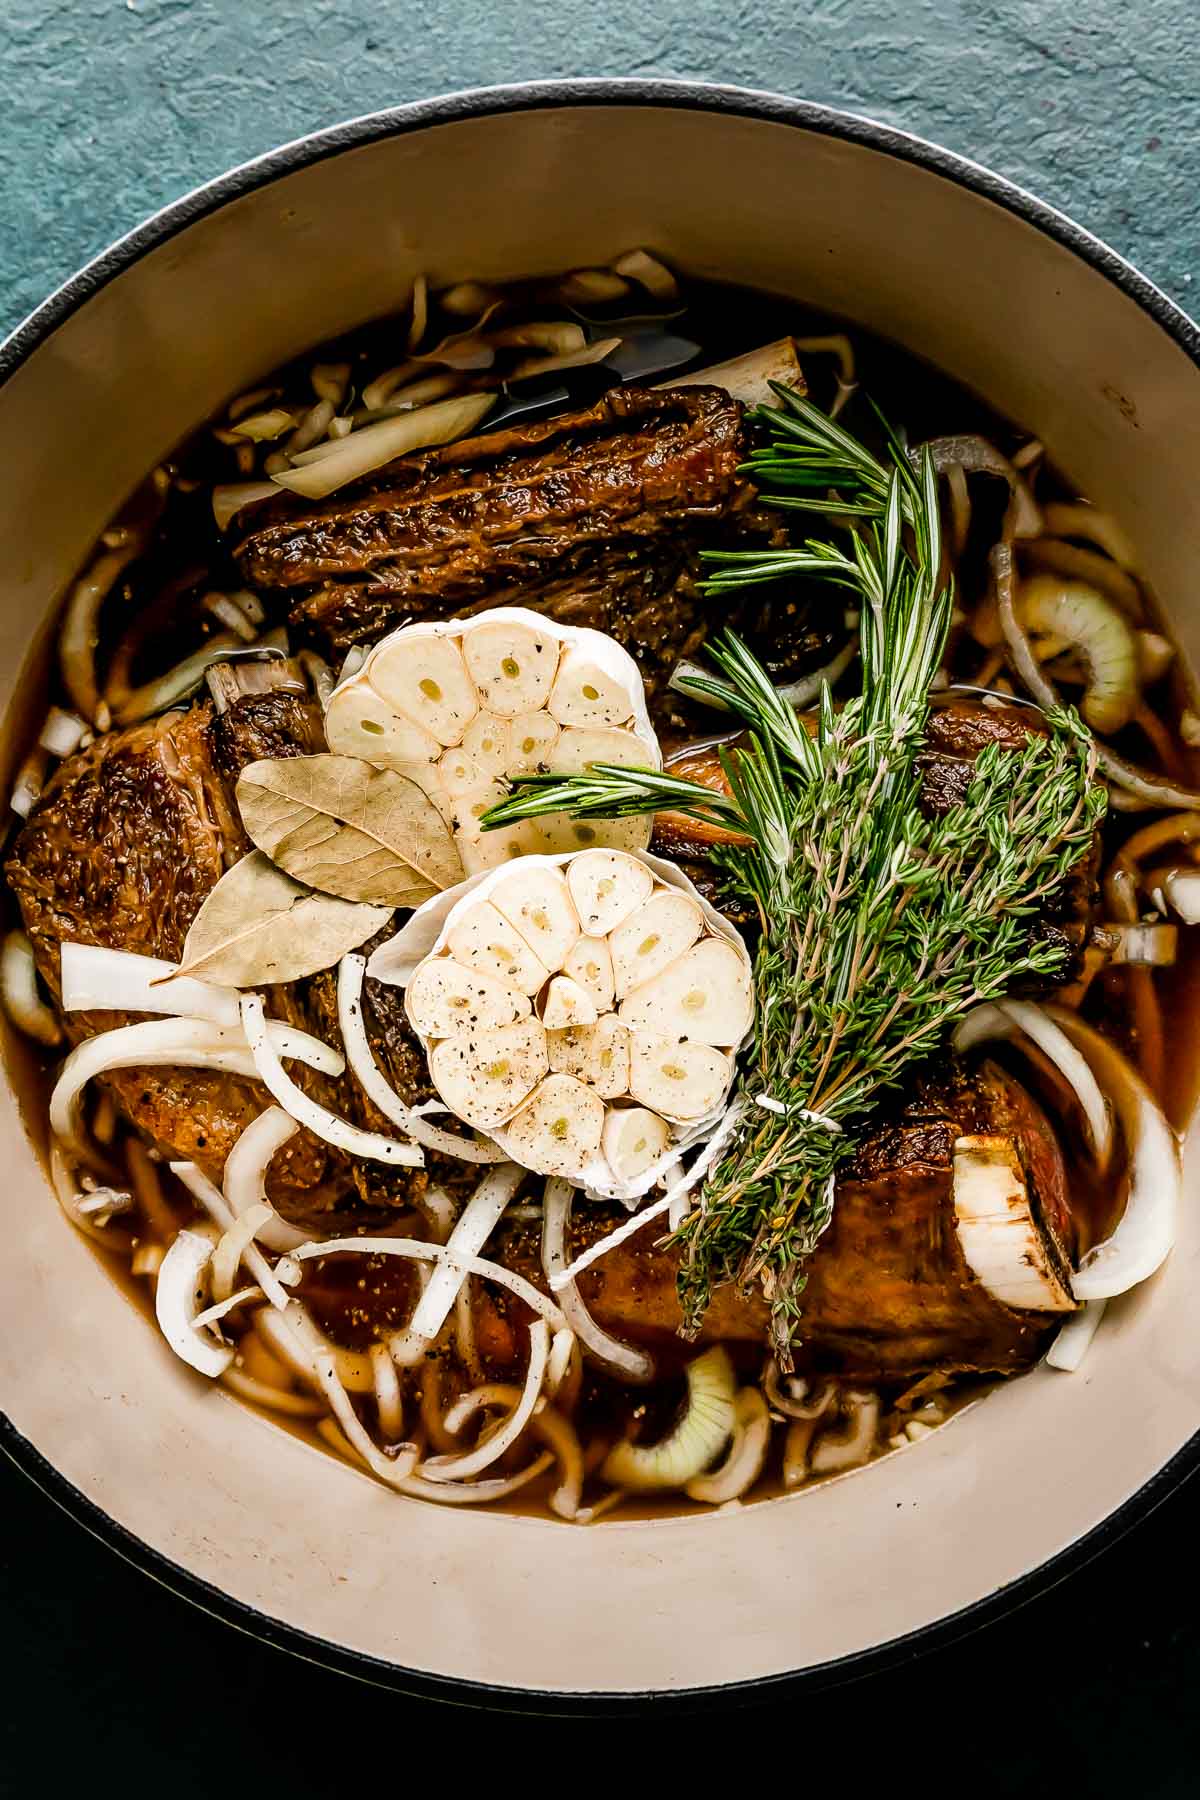 Browned short ribs rest inside of a white ceramic pot filled with braising liquid, garlic, sliced onions, bay leaves, and a bundle of fresh rosemary and thyme. The pot sits atop a dark green textured surface.